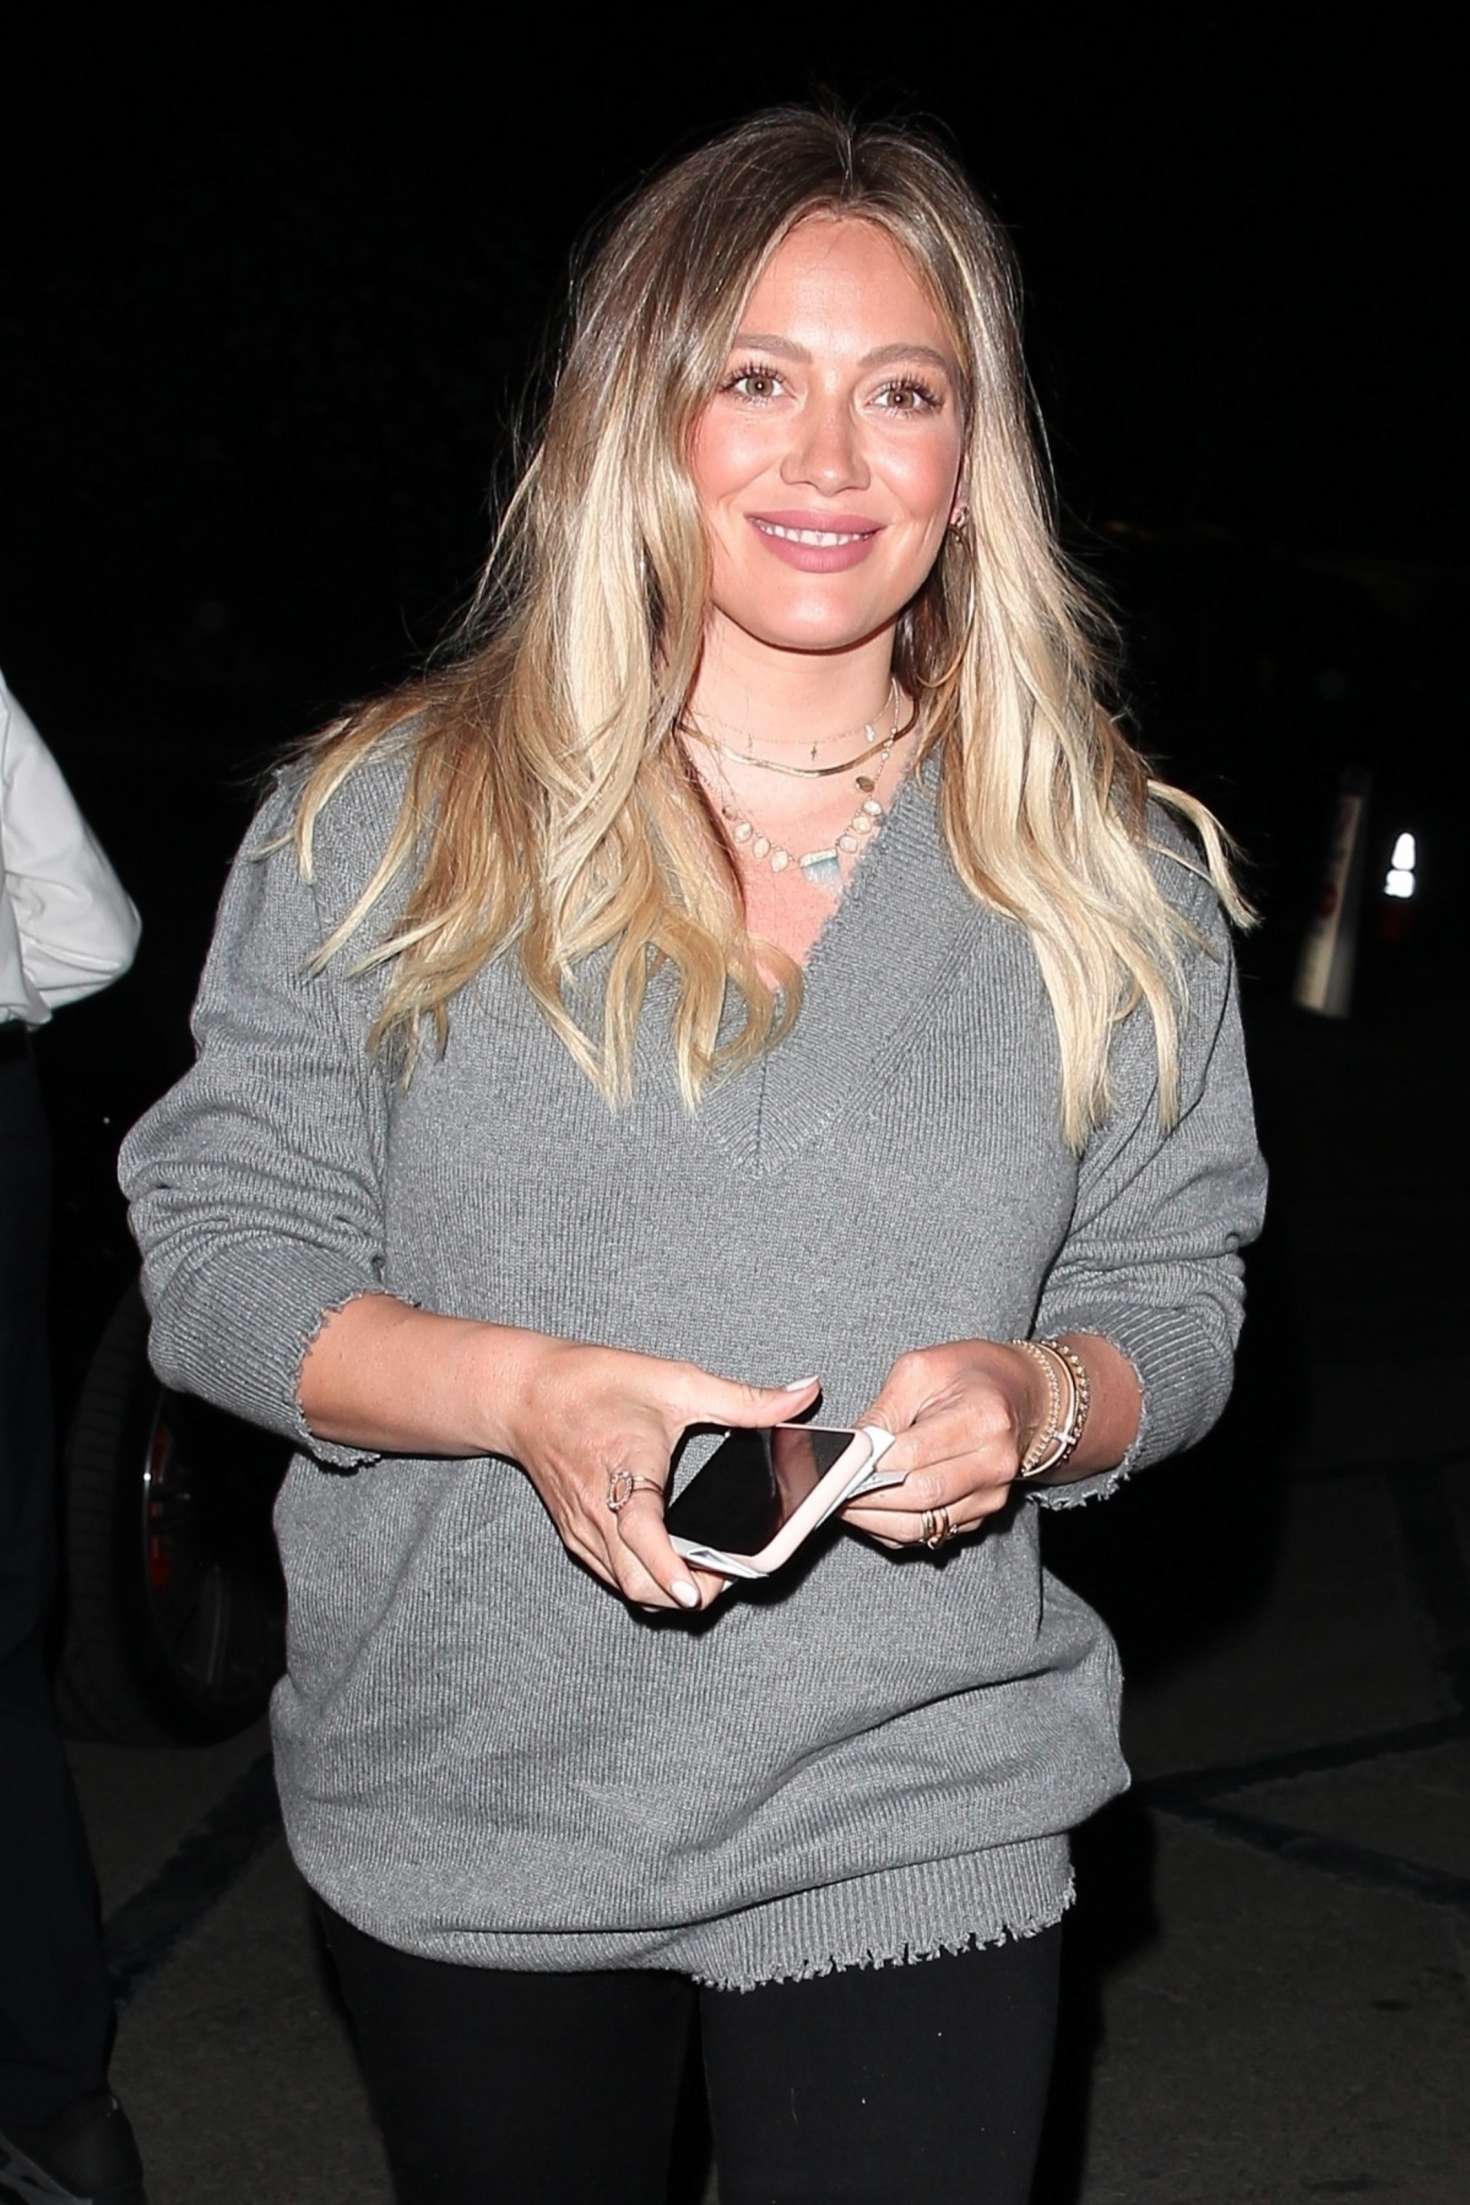 Hilary Duff at the Hollywood Bowl in LA